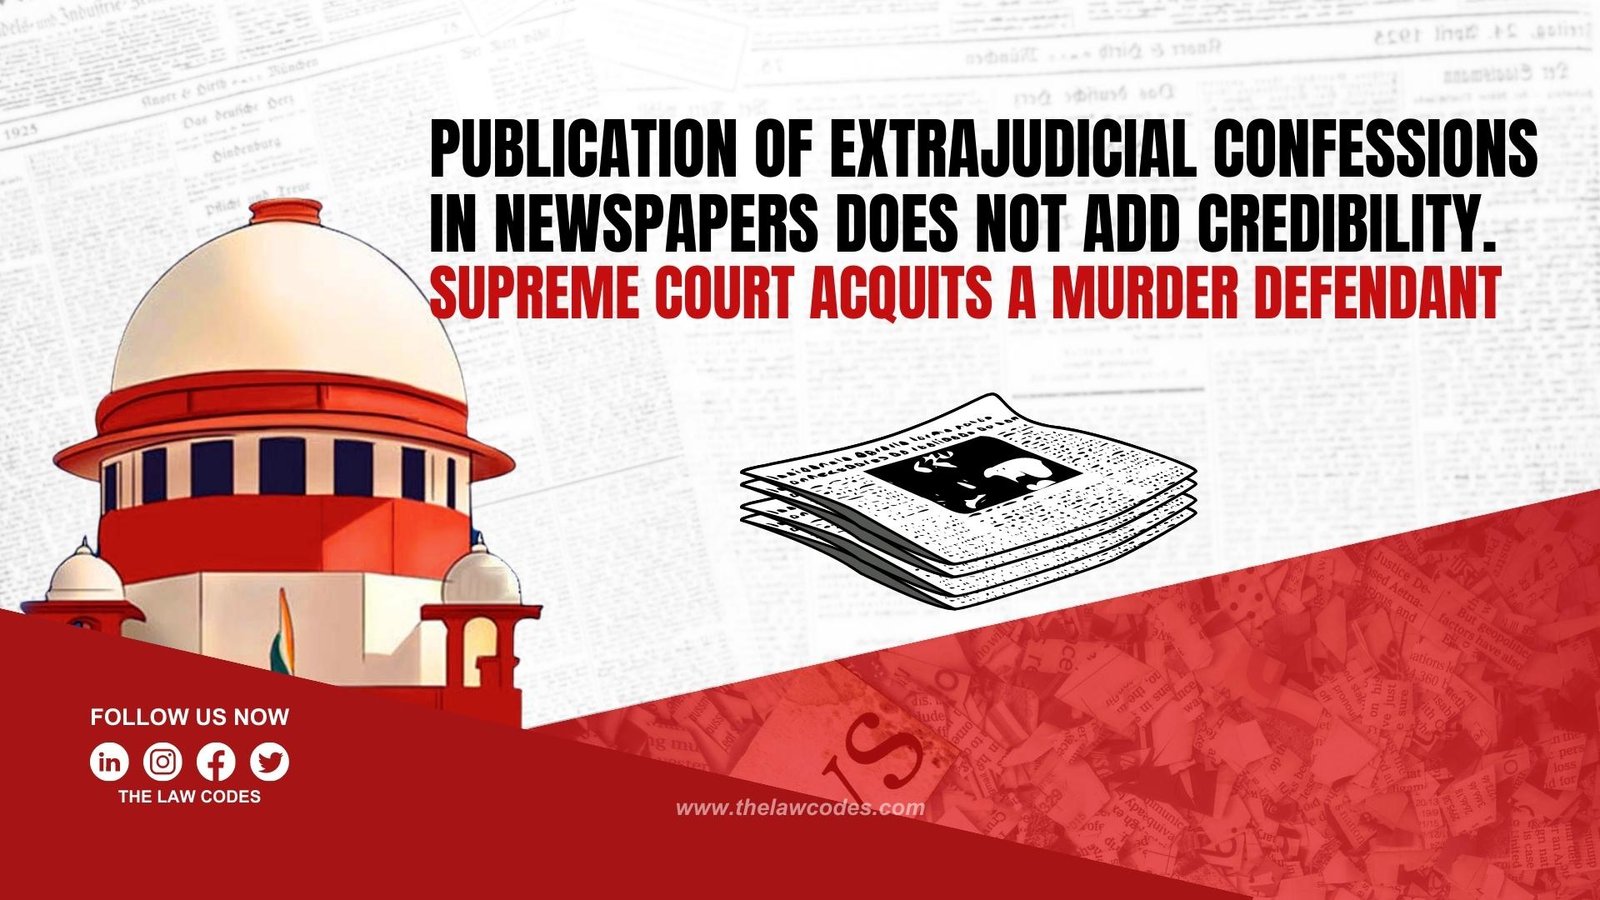 Publication of extrajudicial confessions in newspapers does not add credibility.